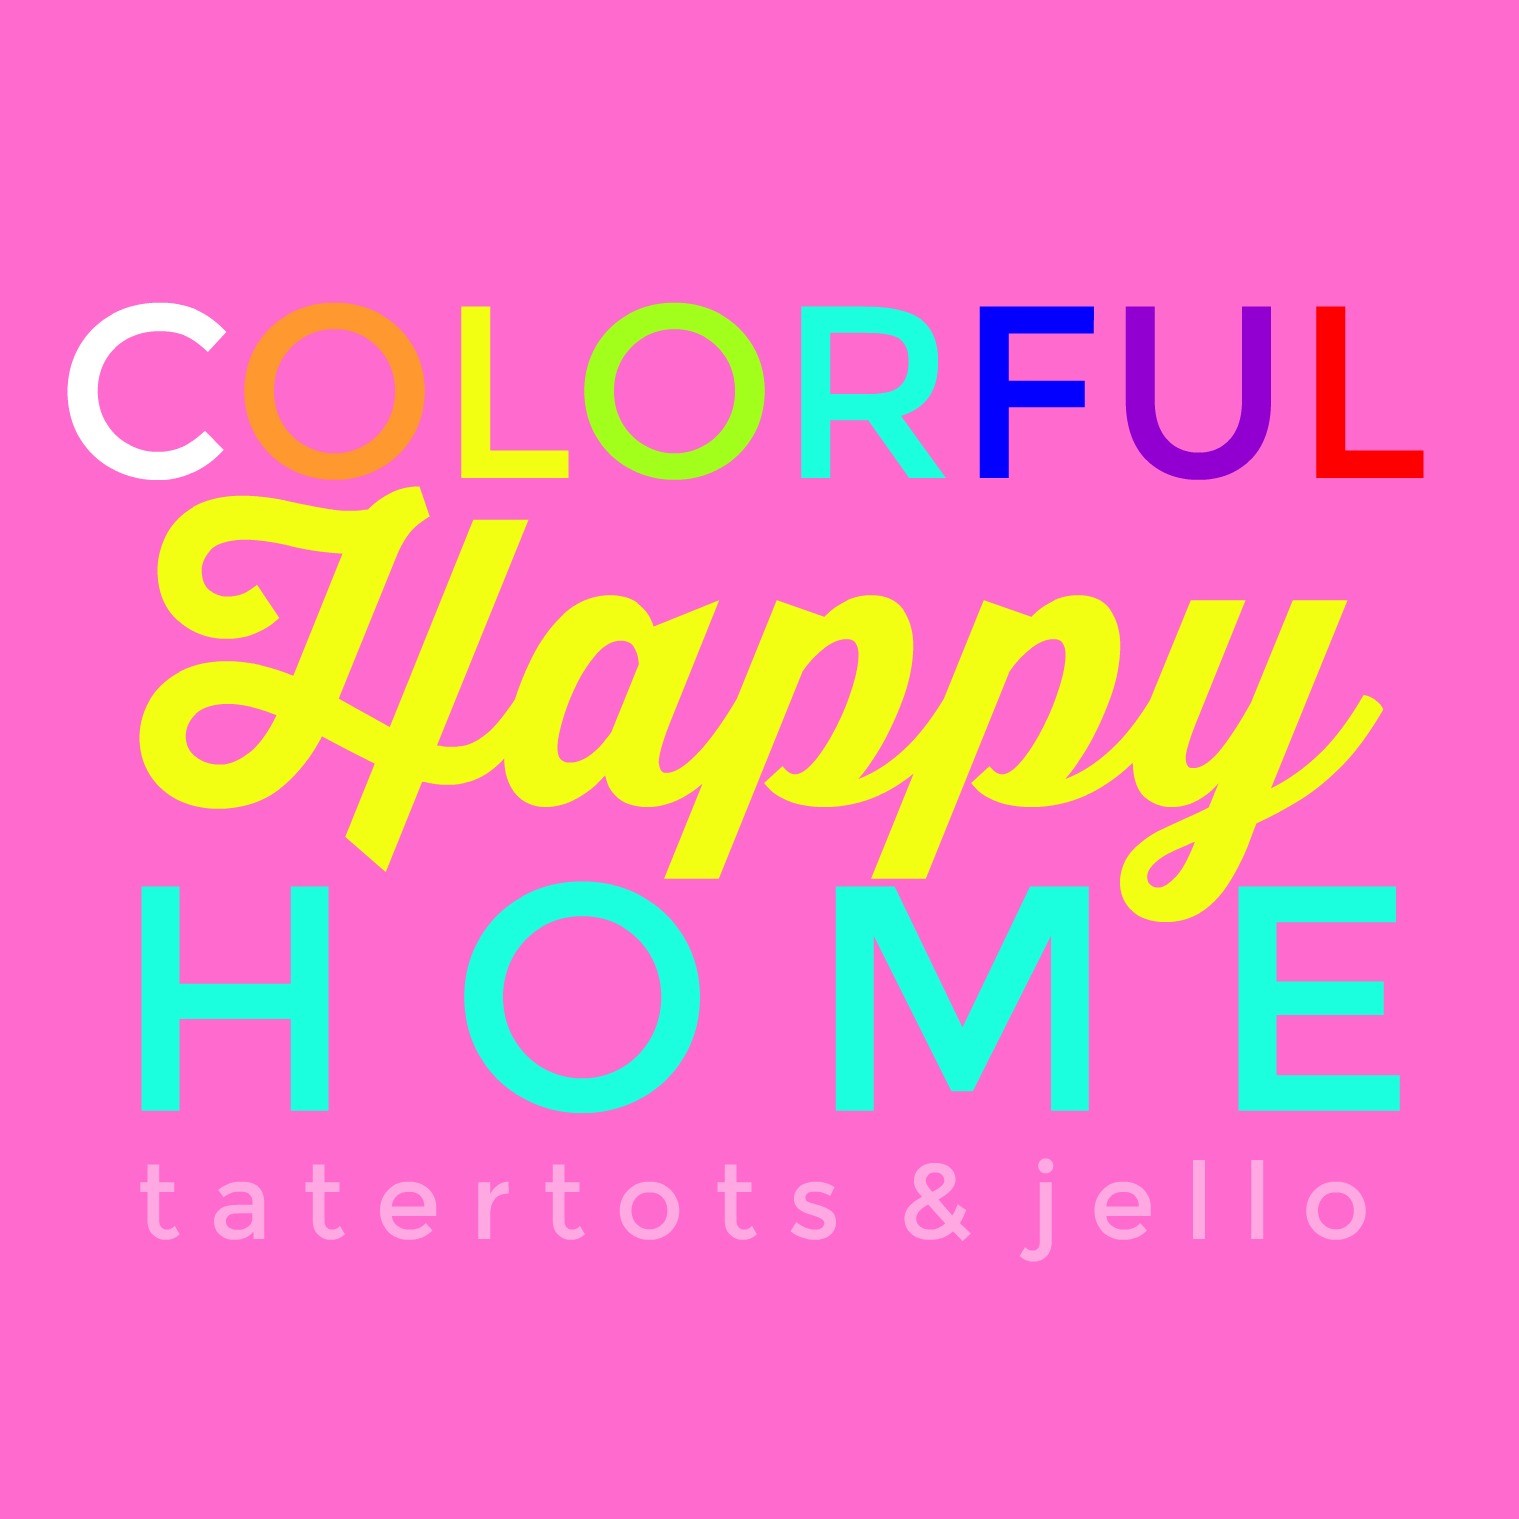 Colorful Happy Home. I'm sharing my love of color through DIY projects in decorating, crafts, recipes and lifestyle to help YOU have a more colorful life!